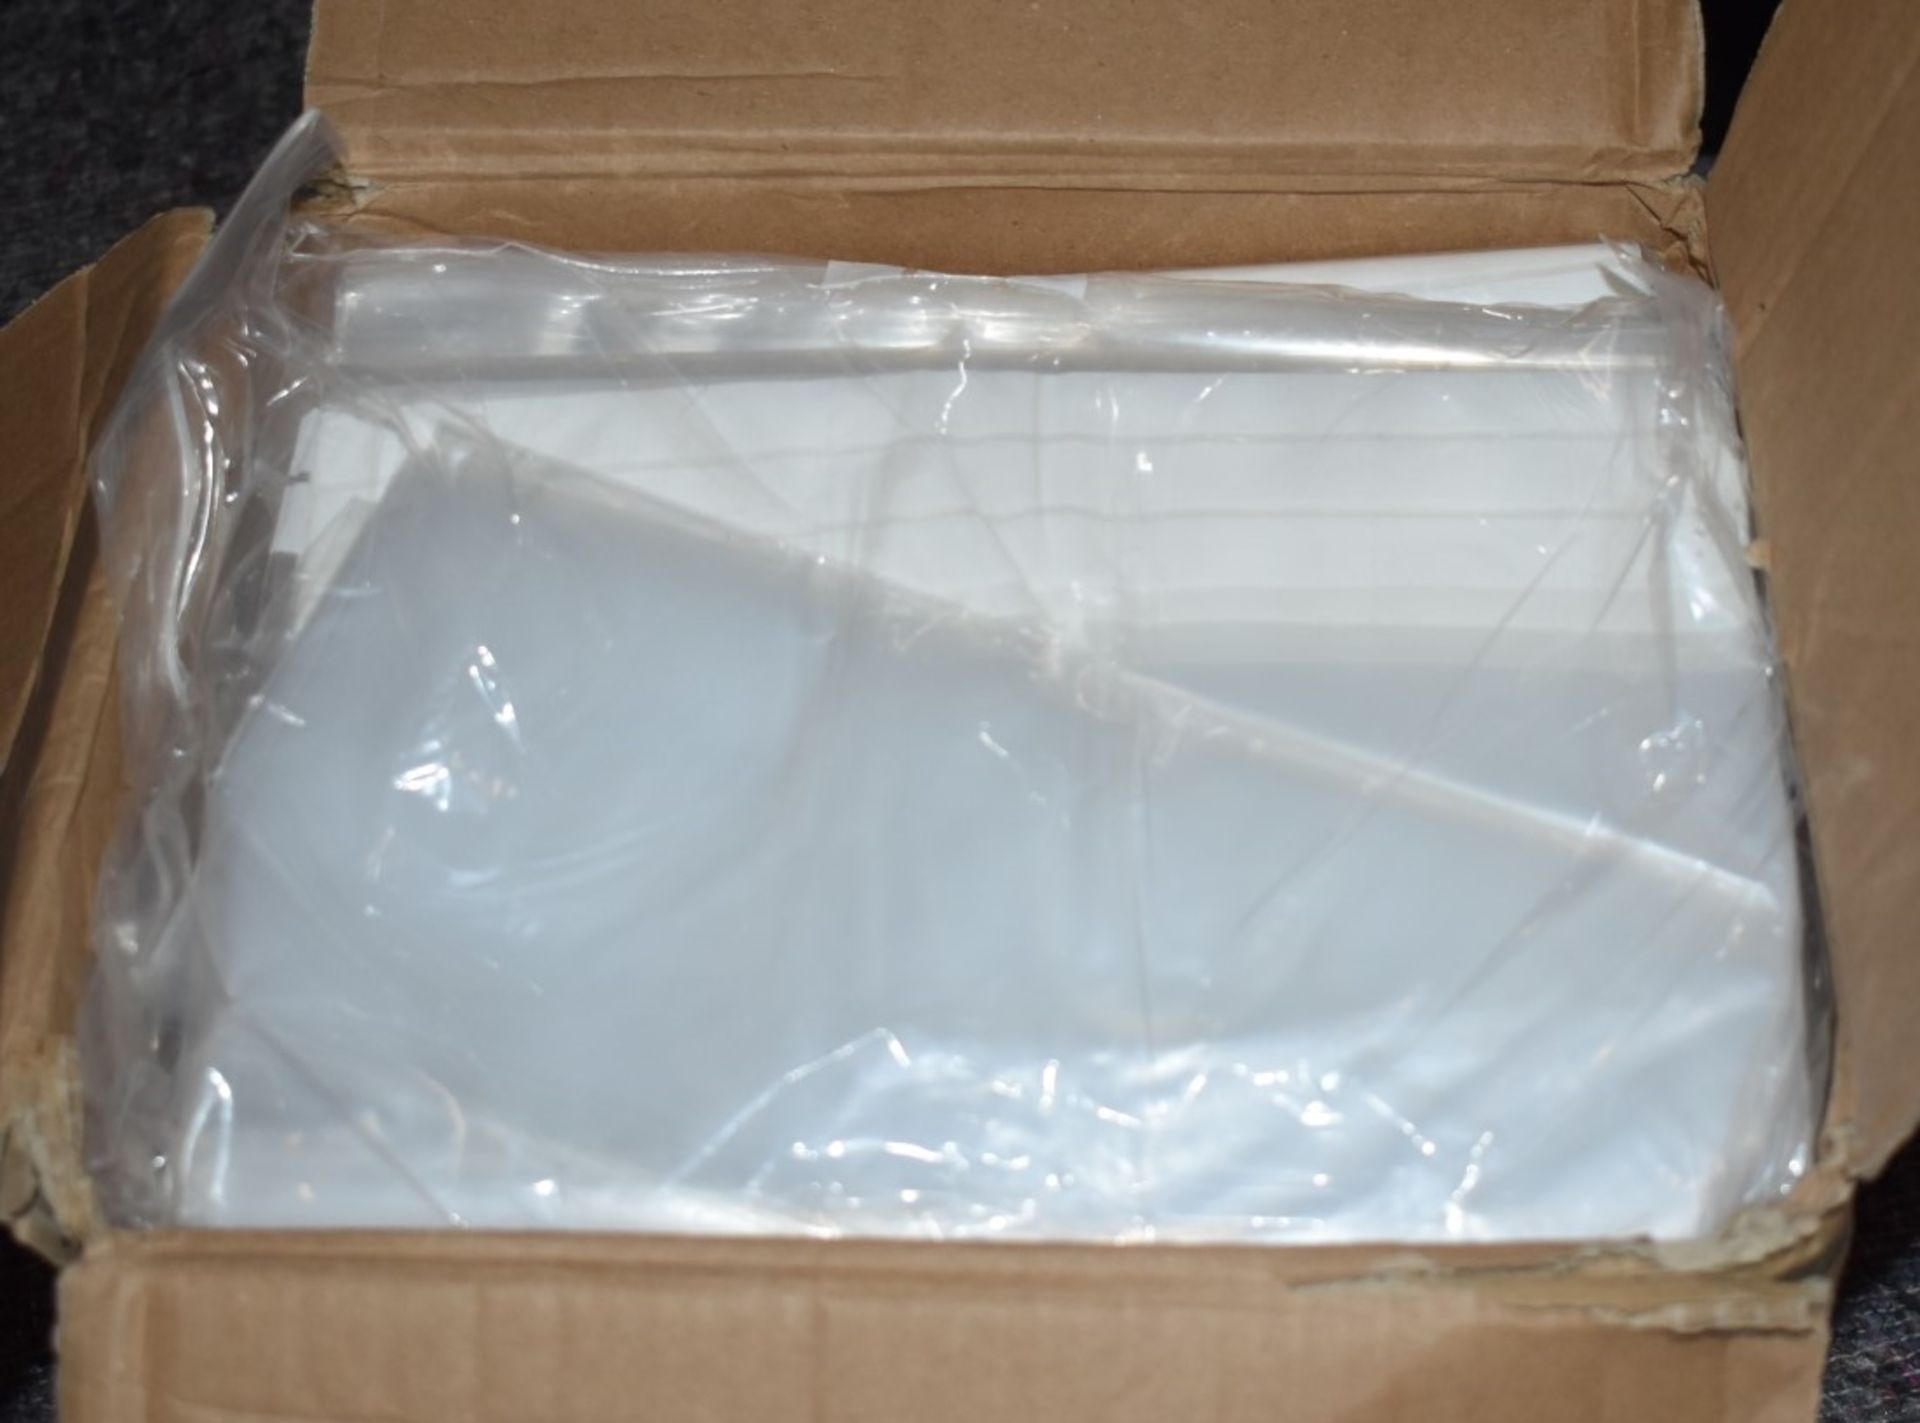 Approx 1,000 x Rajagrp Seal Bags - 254 x 356mm -  Ref: In2139 pal1 wh1 - CL011 - Location: